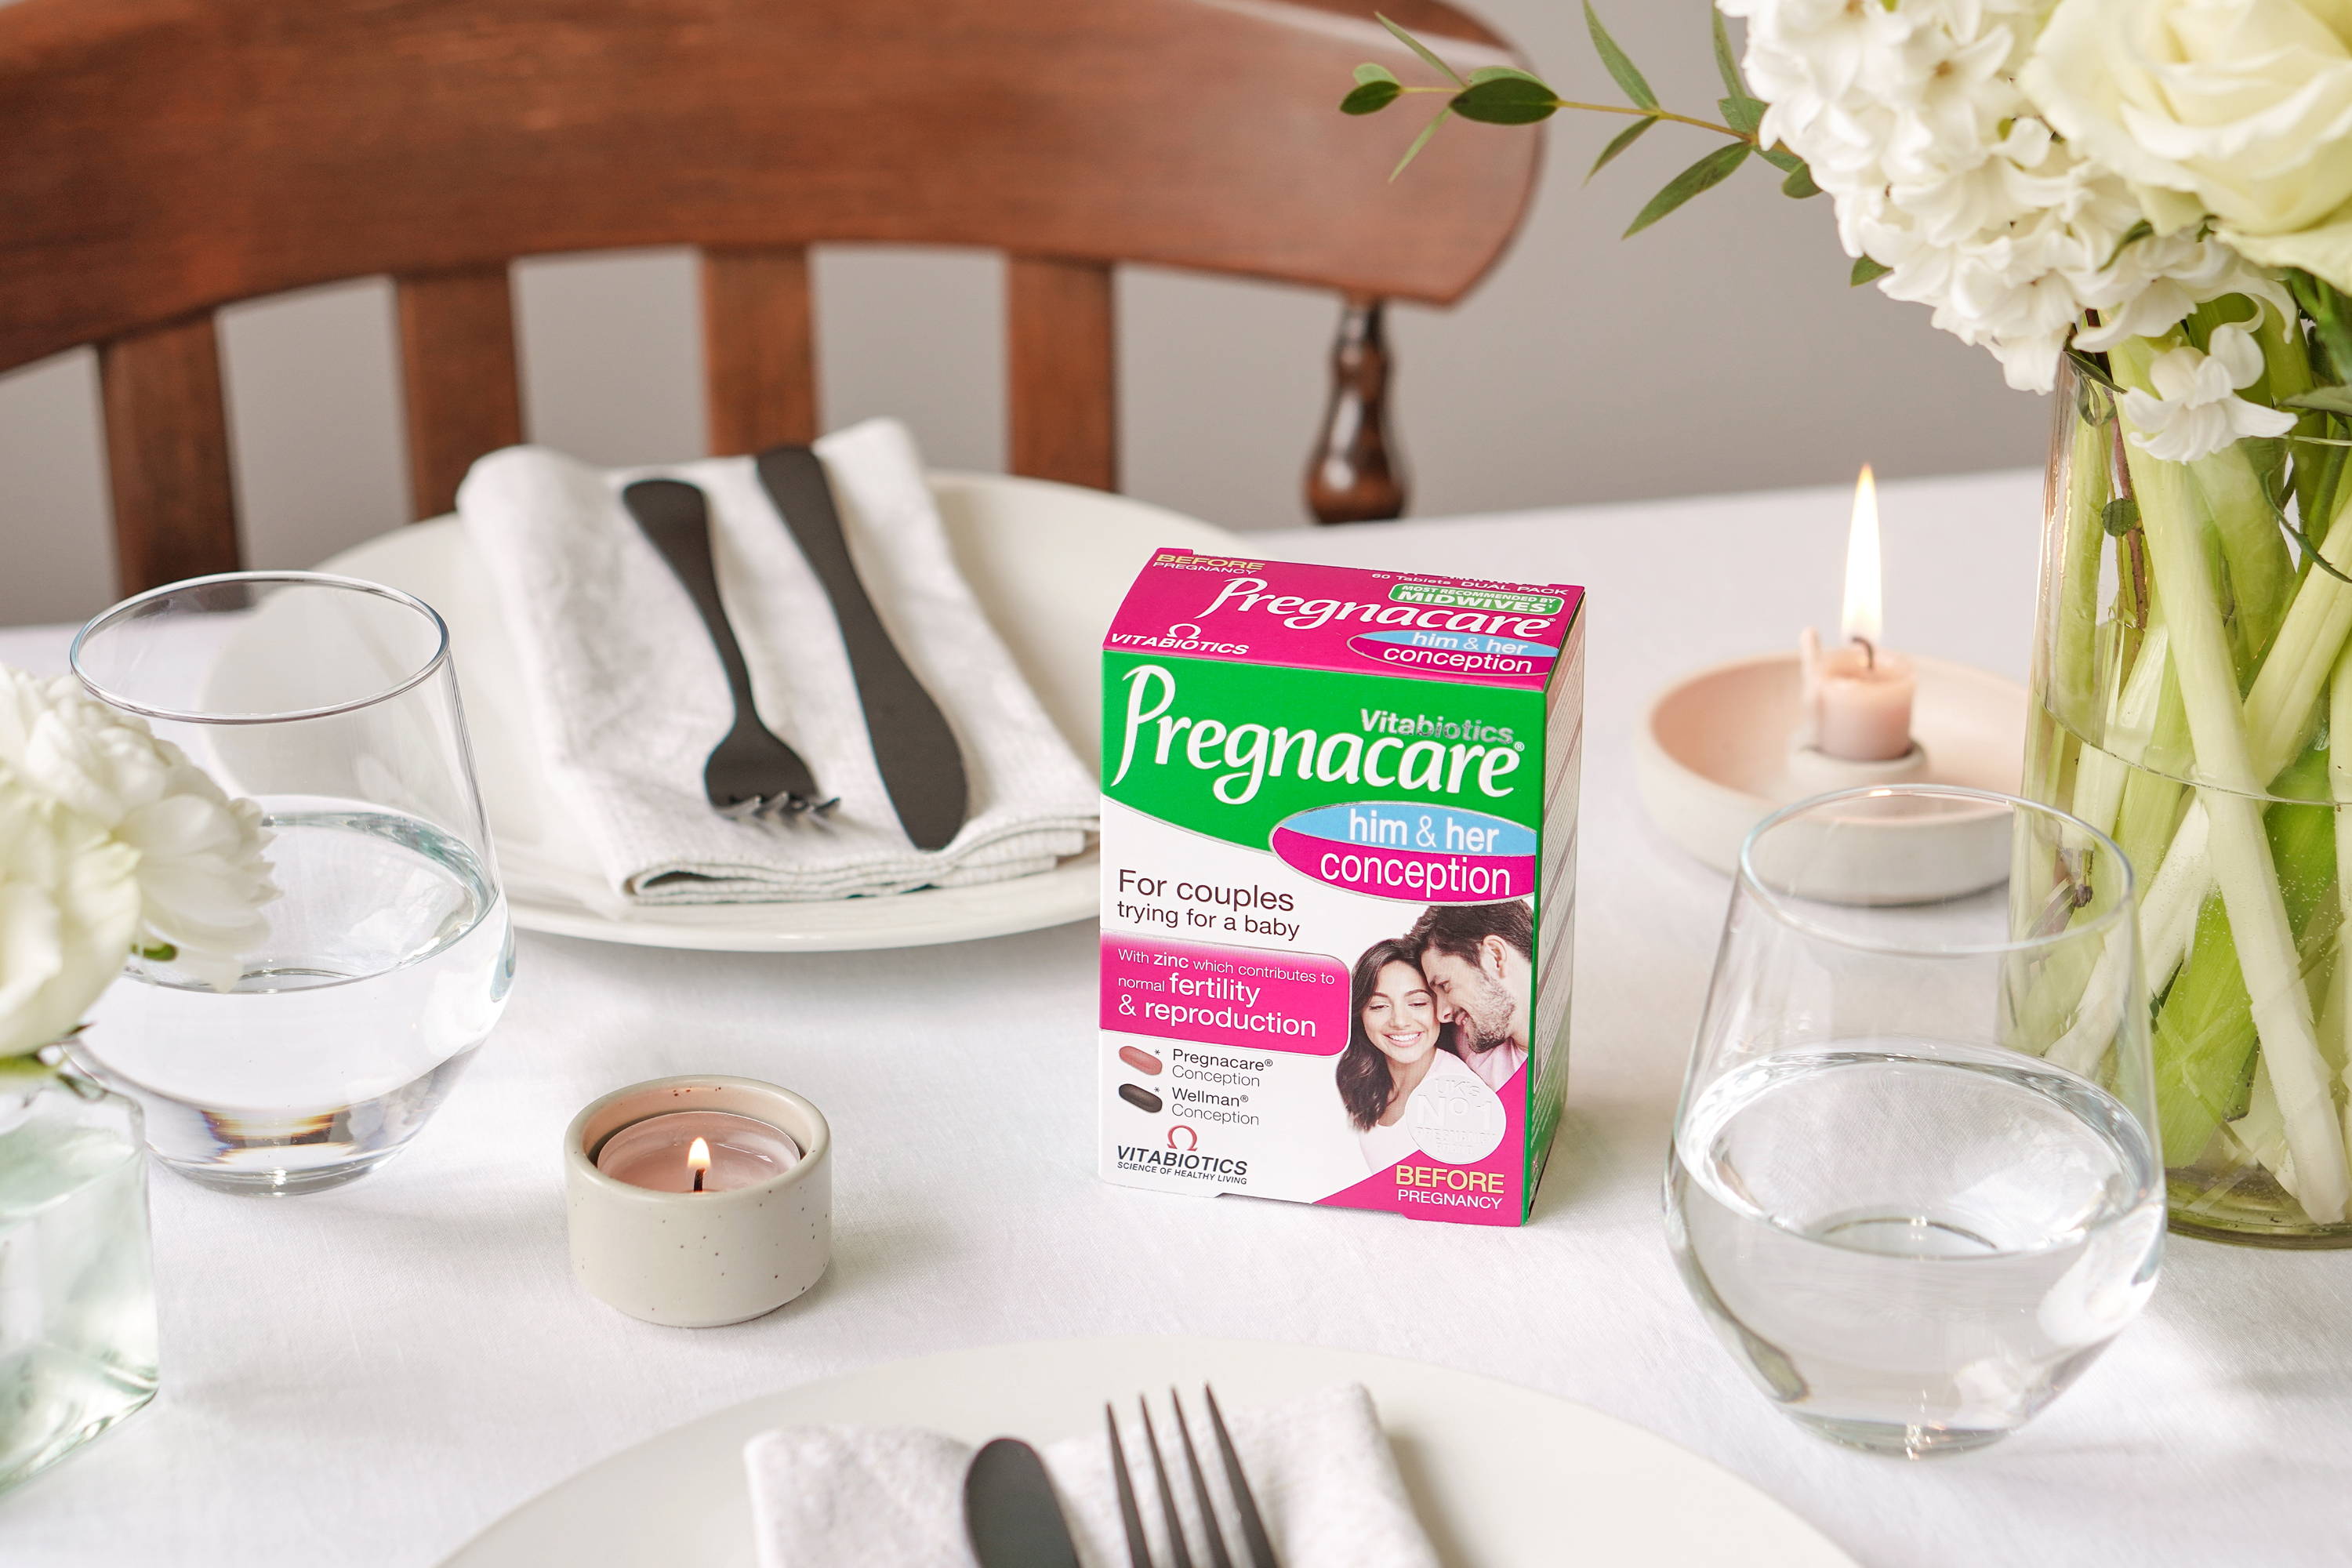  When you’re planning a family, you’ll want to be in the best possible health. Along with lifestyle and dietary changes, Pregnacare Him & Her Conception is designed to safeguard your nutritional intake with specialist daily multivitamins optimised for the requirements of men and women trying for a baby. 